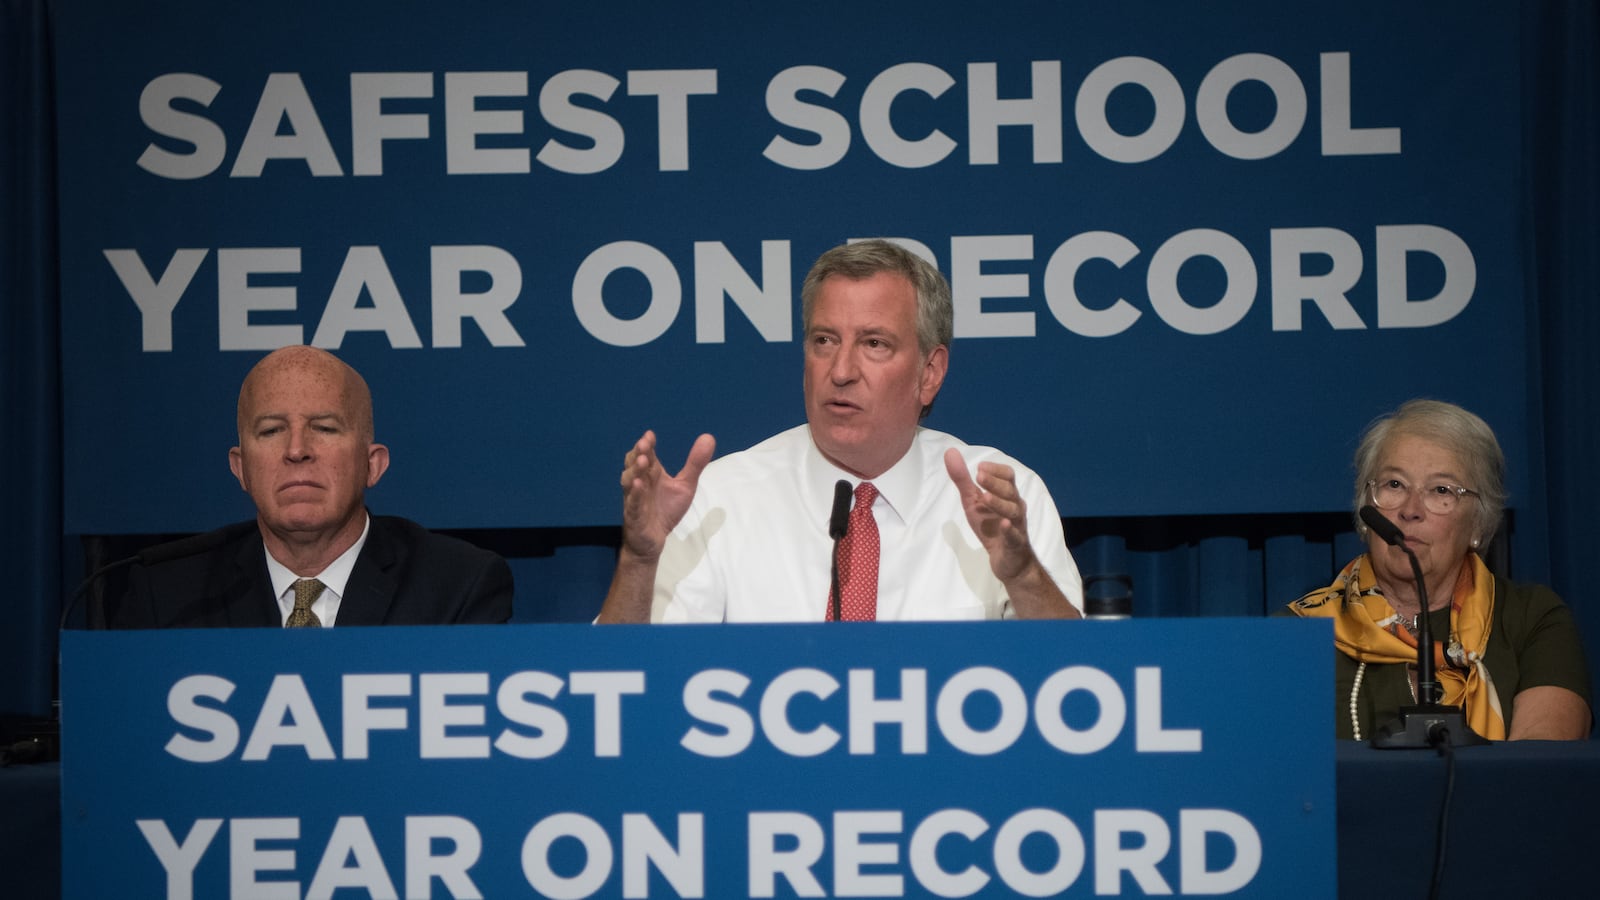 Mayor Bill de Blasio, flanked by police Commissioner James O'Neill and Chancellor Carmen Fariña held a press conference on school safety at M.S. 88 in Brooklyn in August.